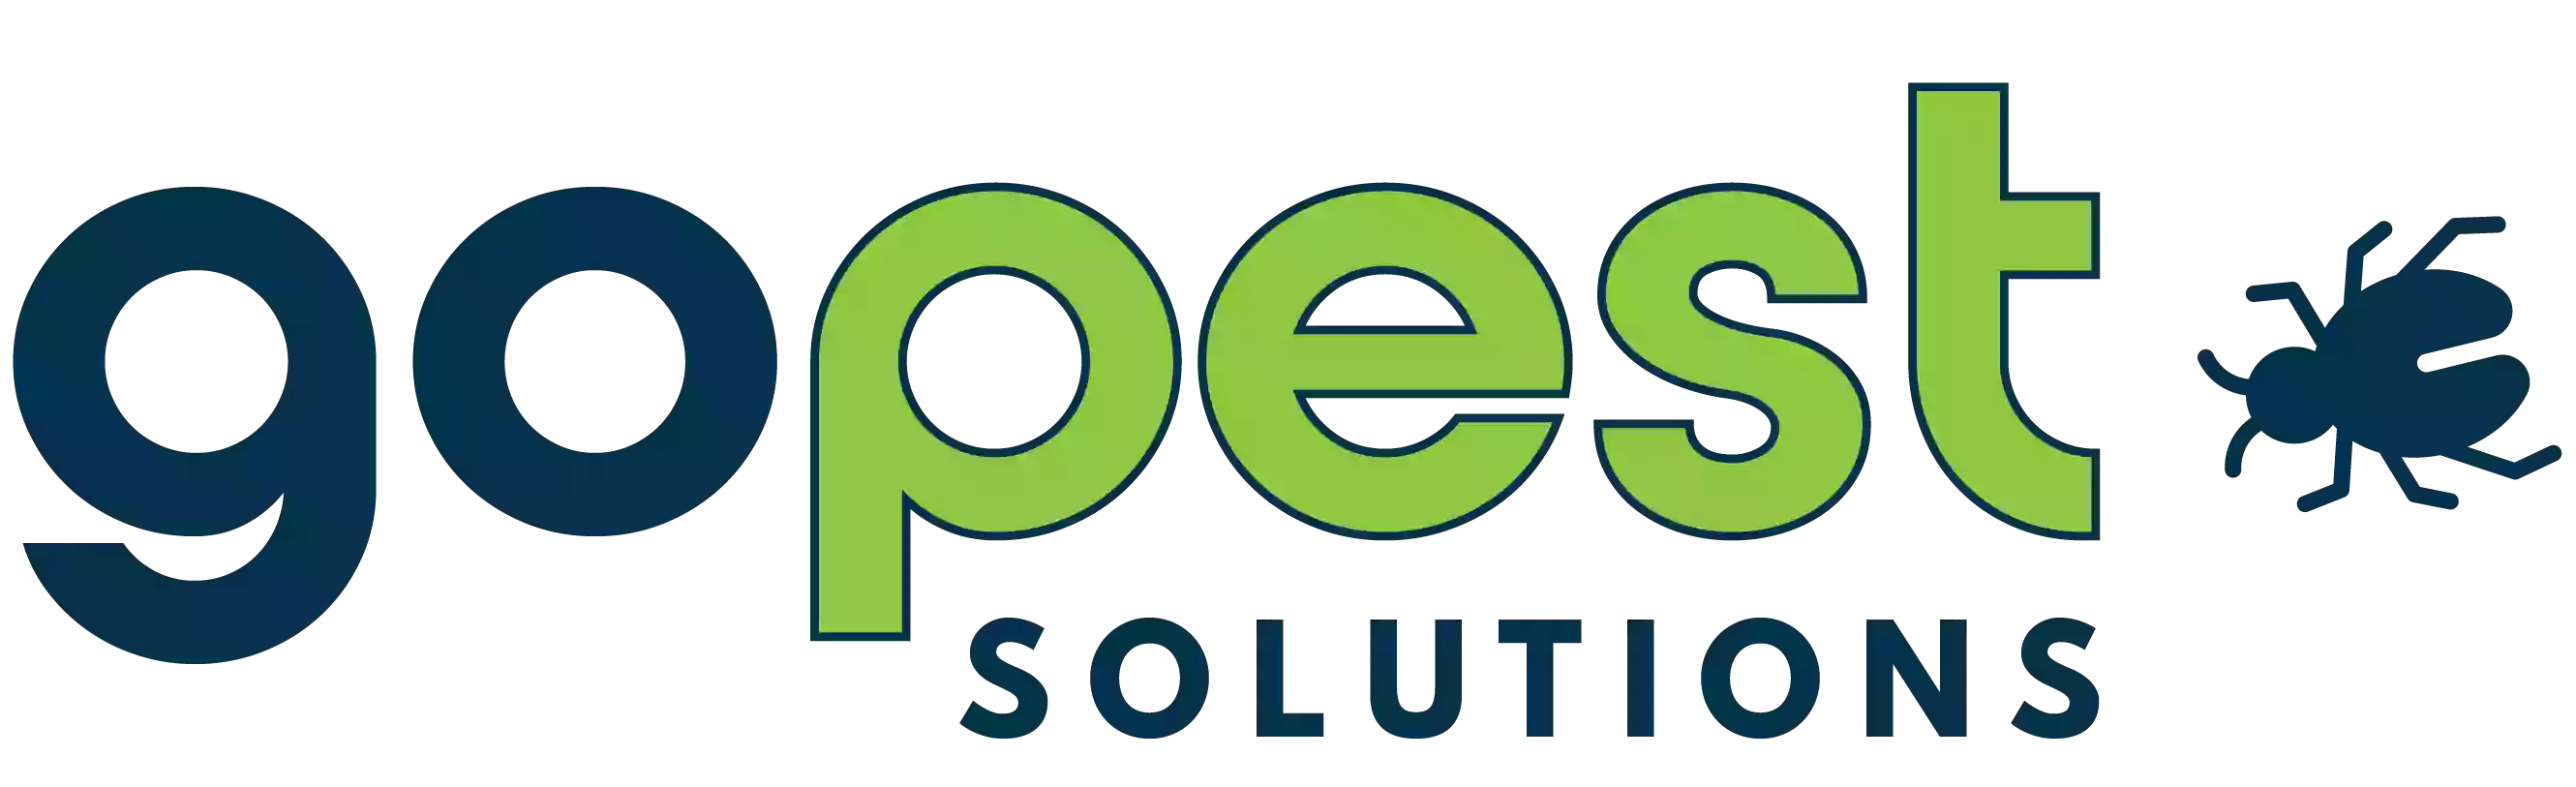 GoPest Solutions